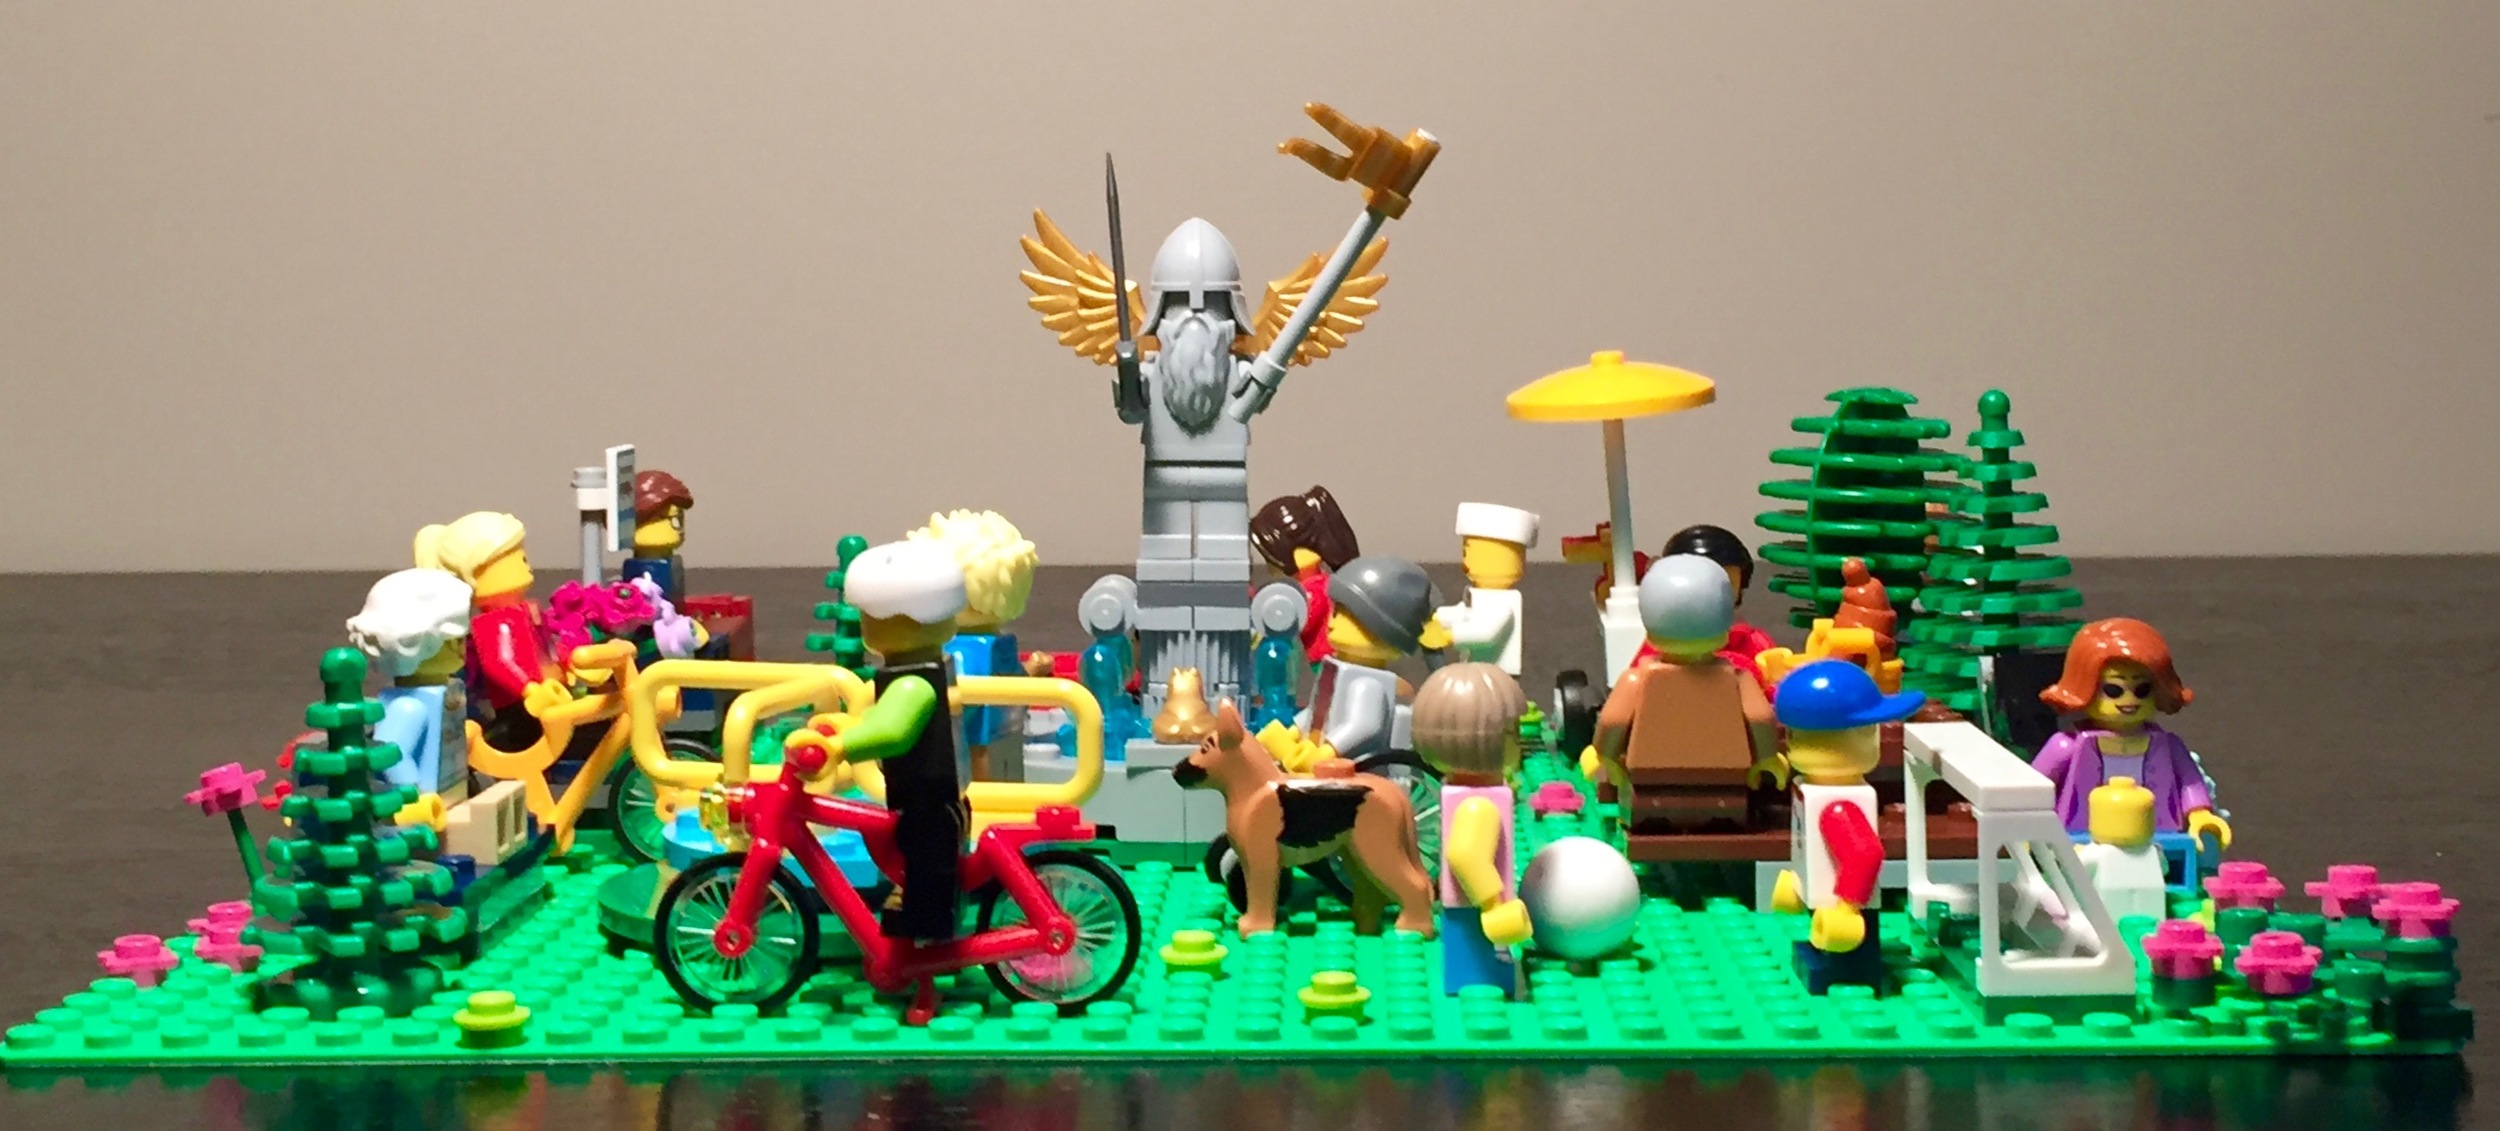 lego people pack park